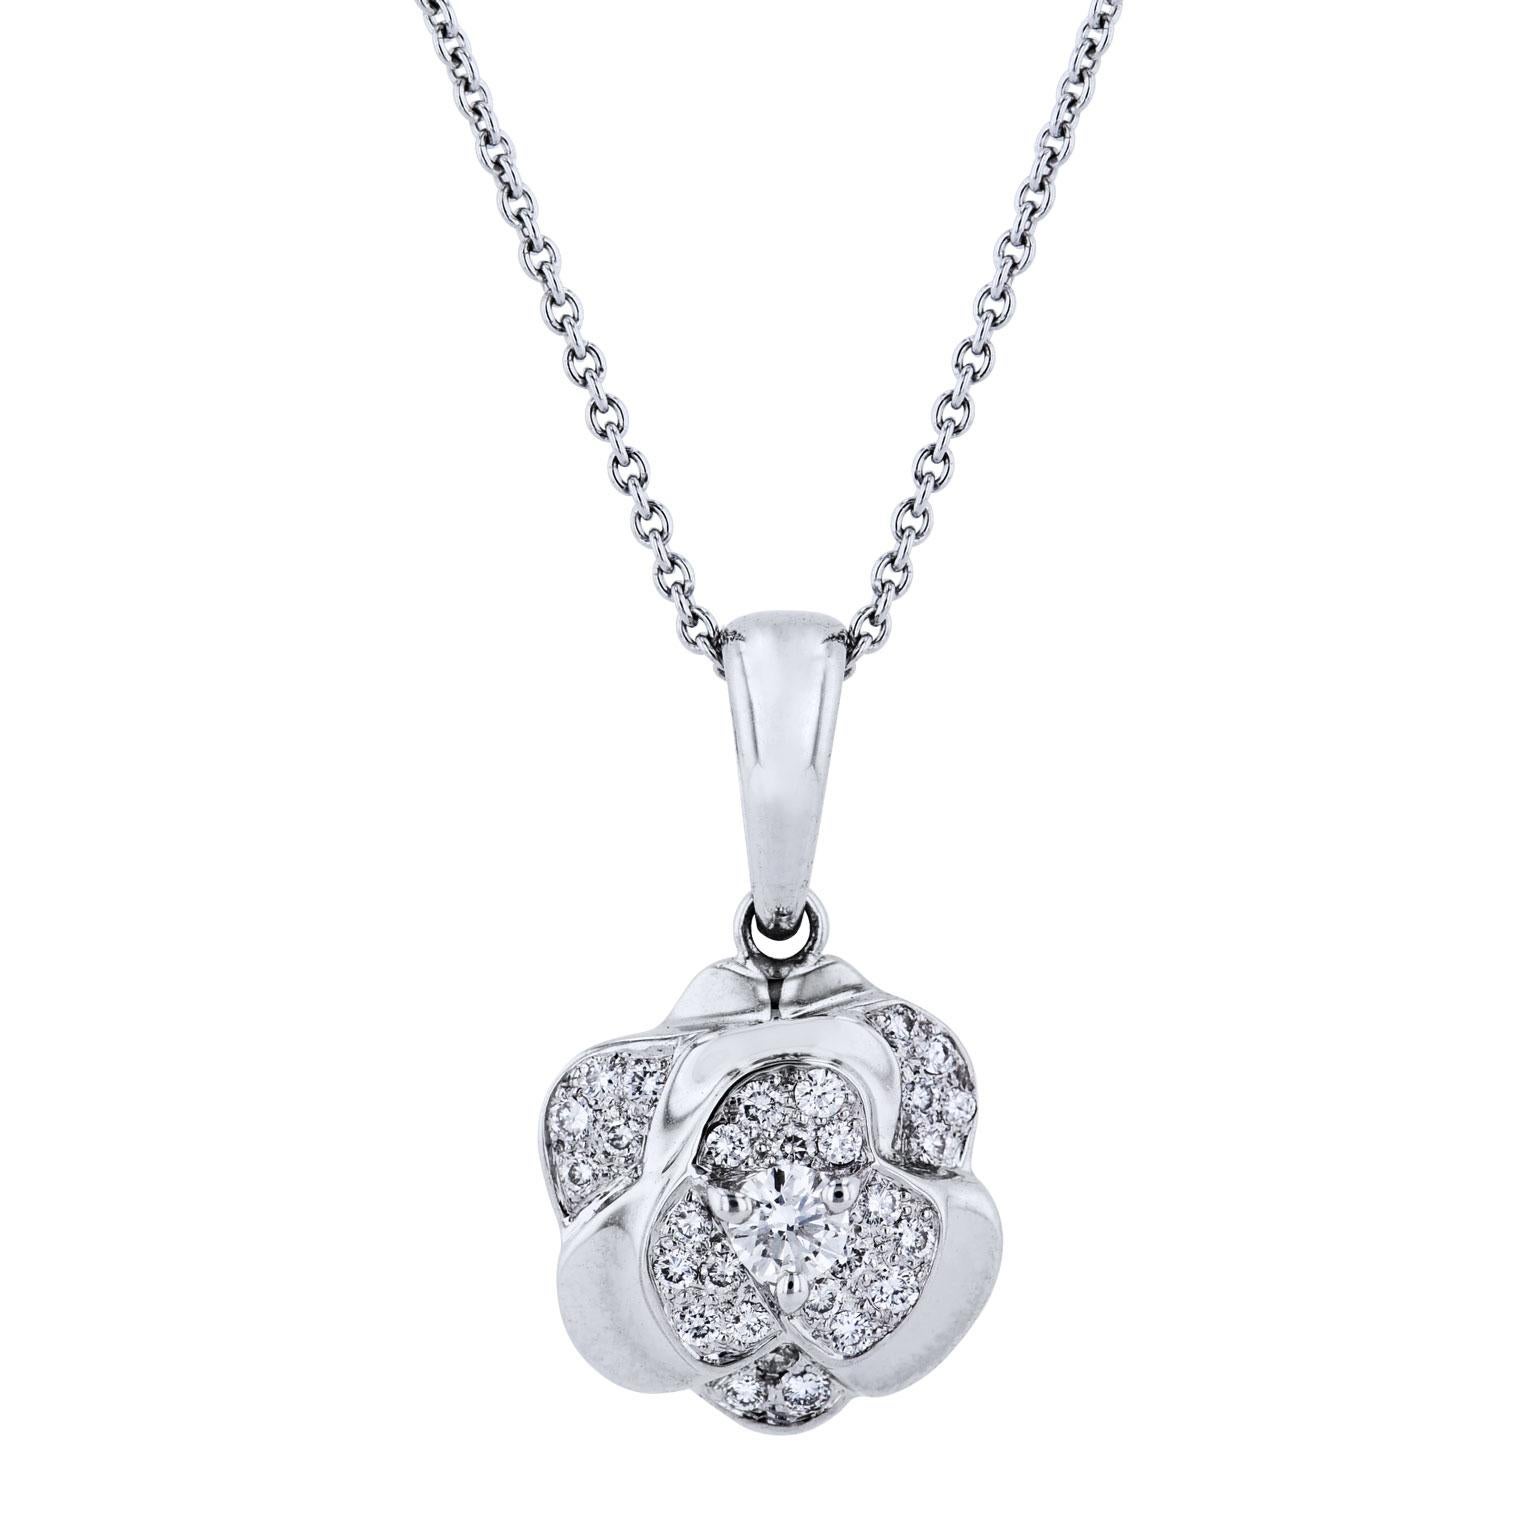 Estate 18 Karat White Gold 0.25 Carat Pave Diamond Pendant 

Twisted metal builds subtle texture to form this previously loved 18 karat white gold pendant featuring 0.25 carat of pave-set diamond (only the pendant reflected in price).